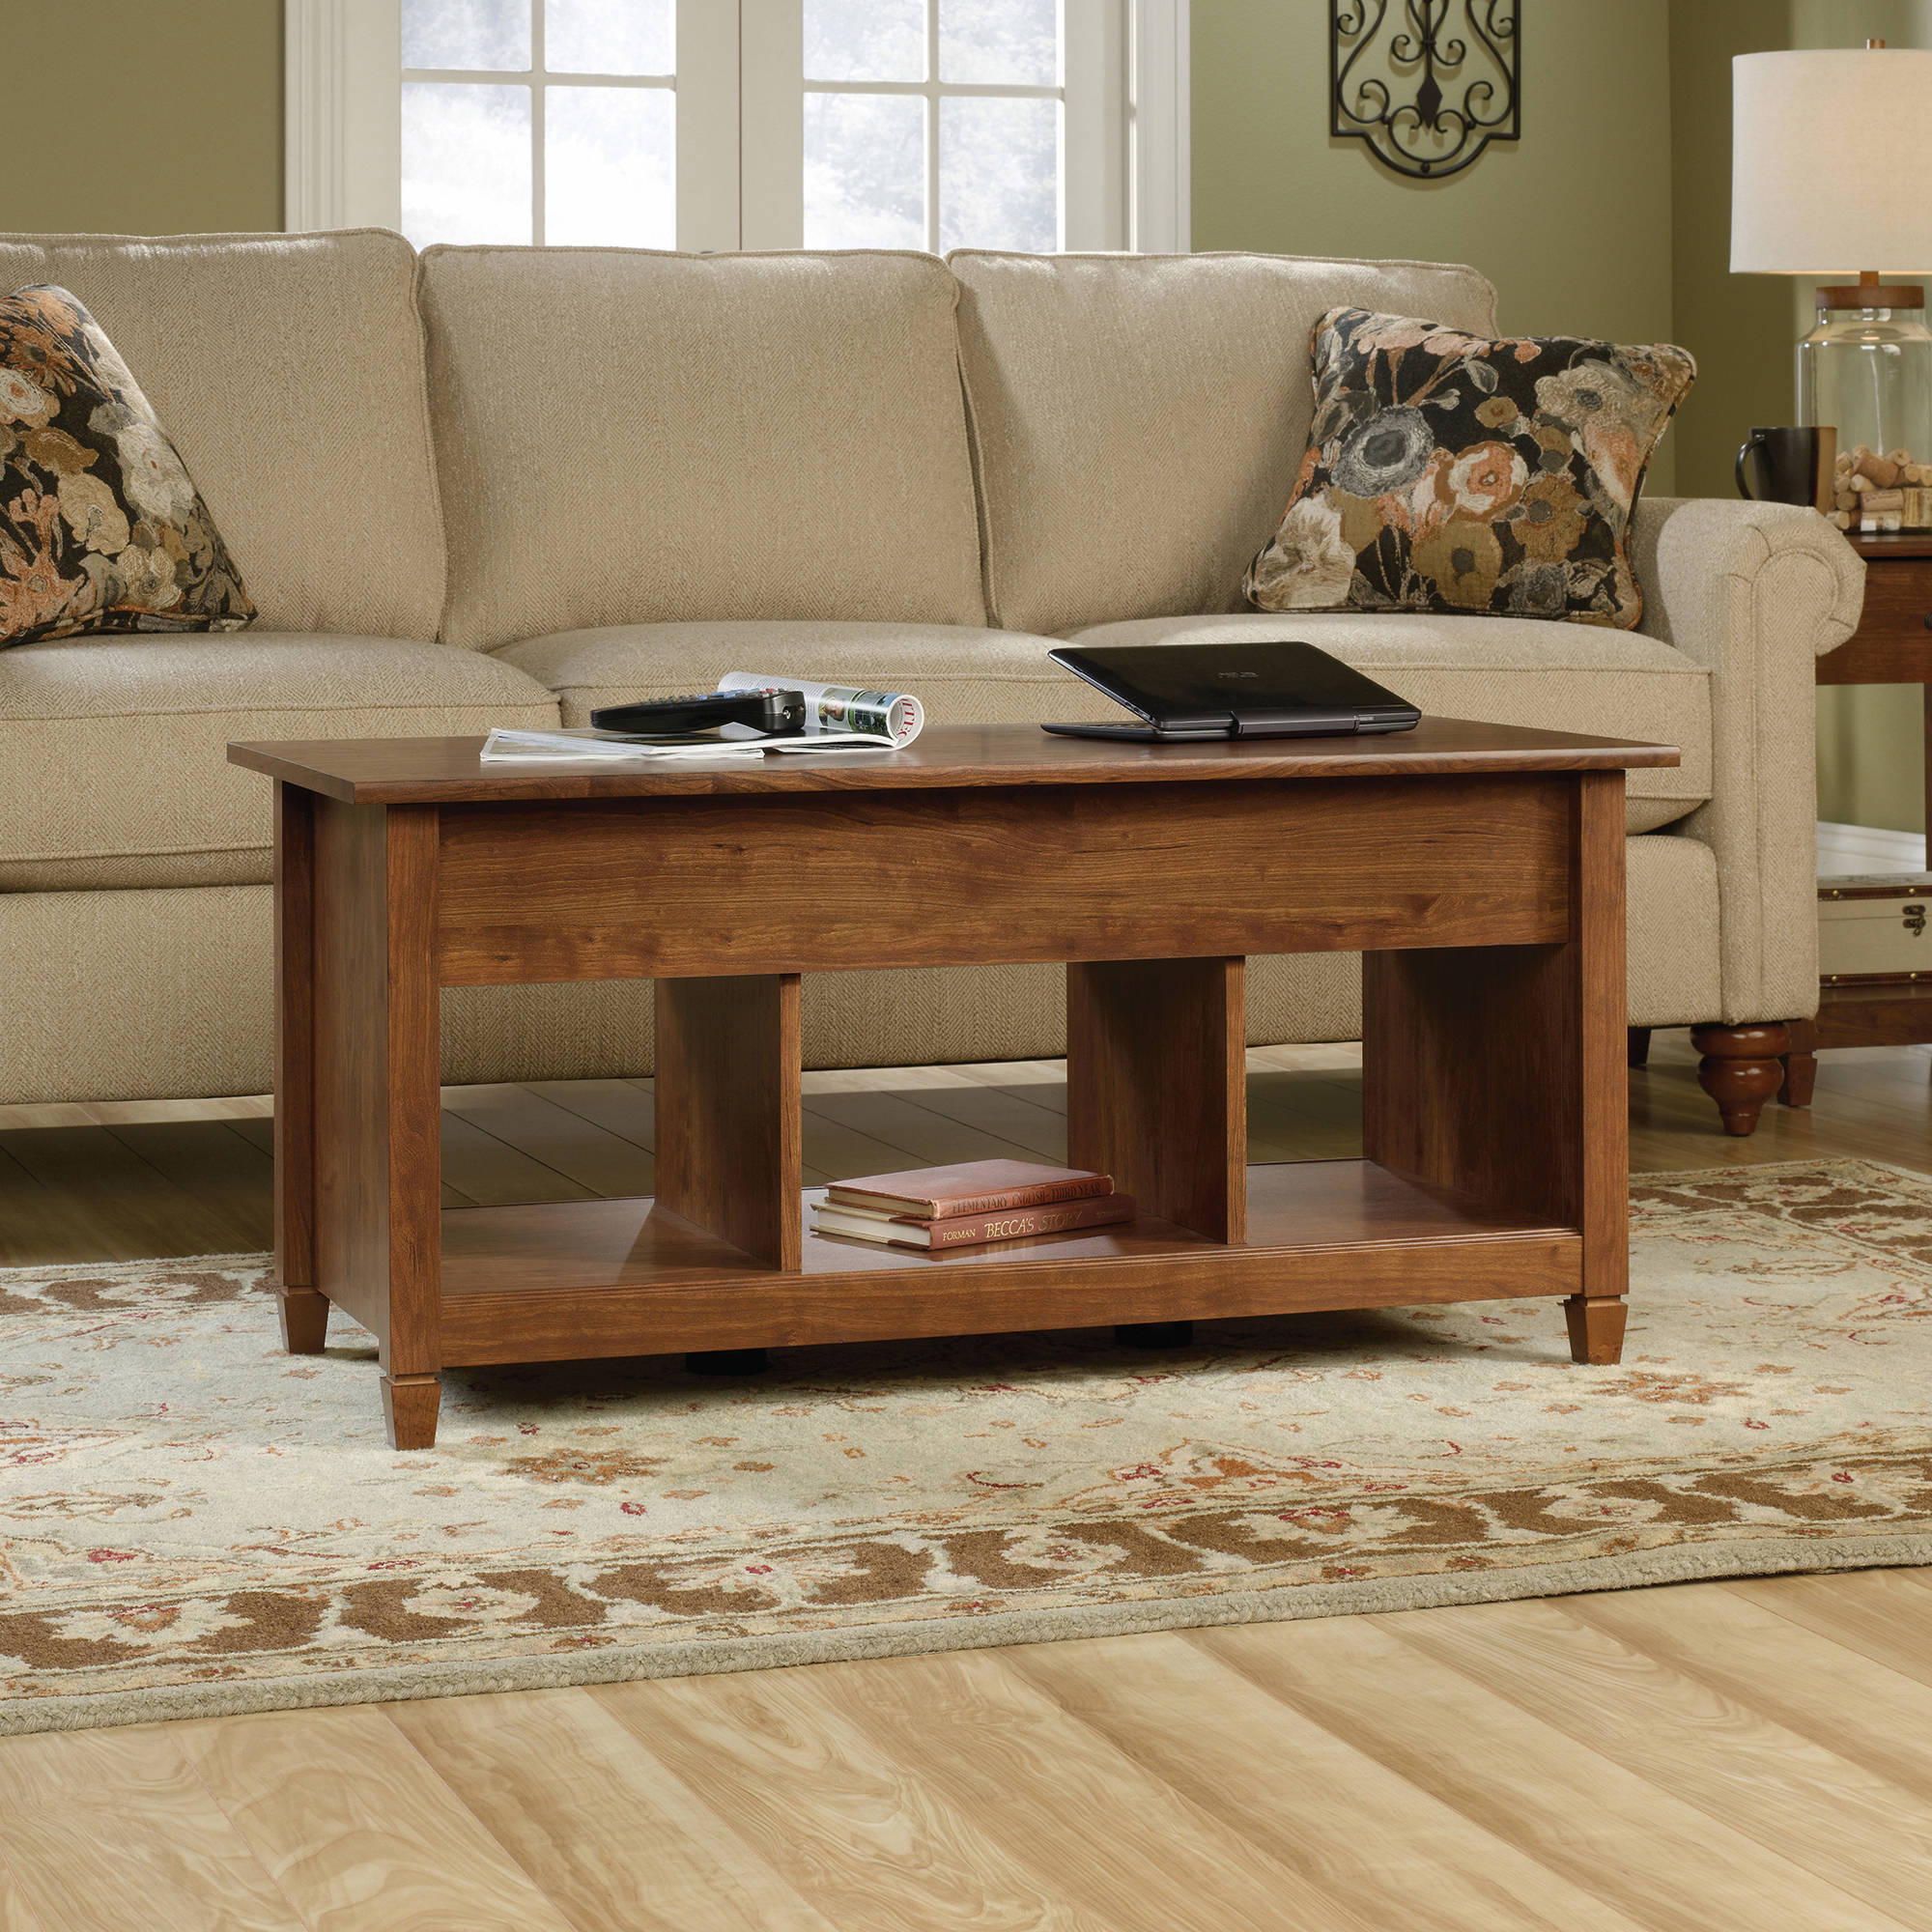 Sauder Edge Water Lift Top Coffee Table Multiple Finishes Walmart with size 2000 X 2000